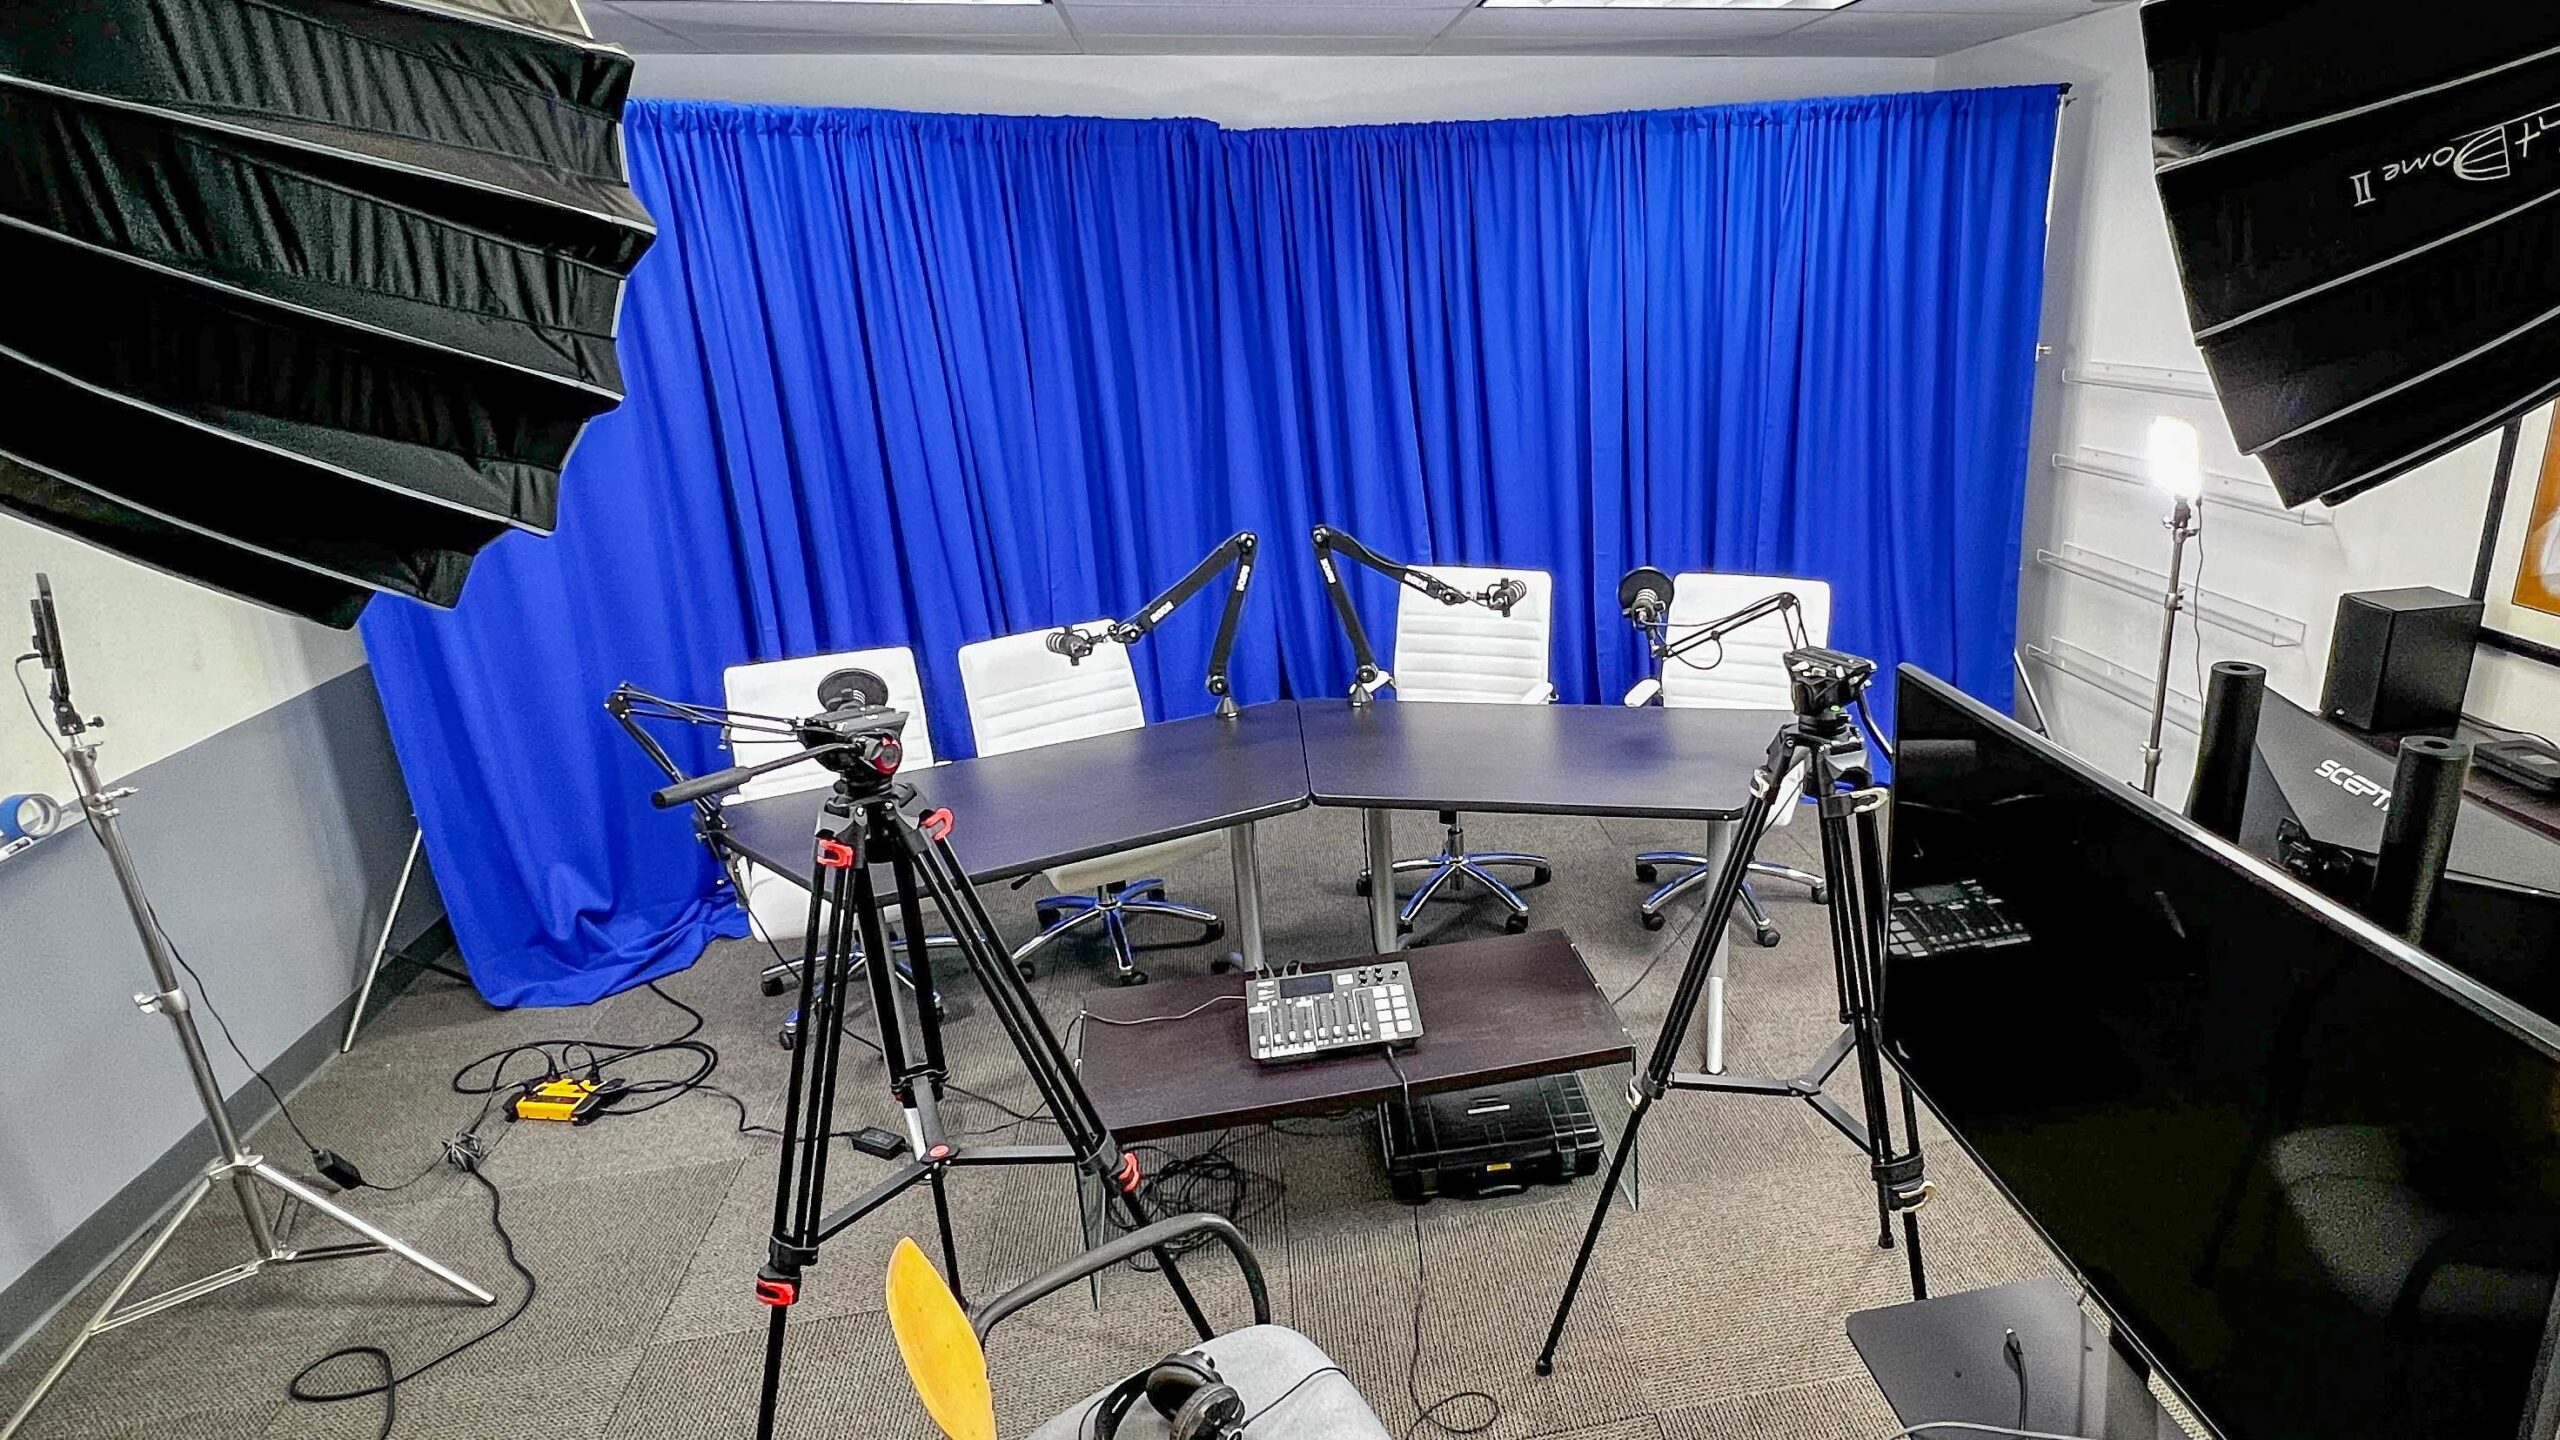 A full podcast set up with microphones, cameras, a sound board, background, lights, and monitors.